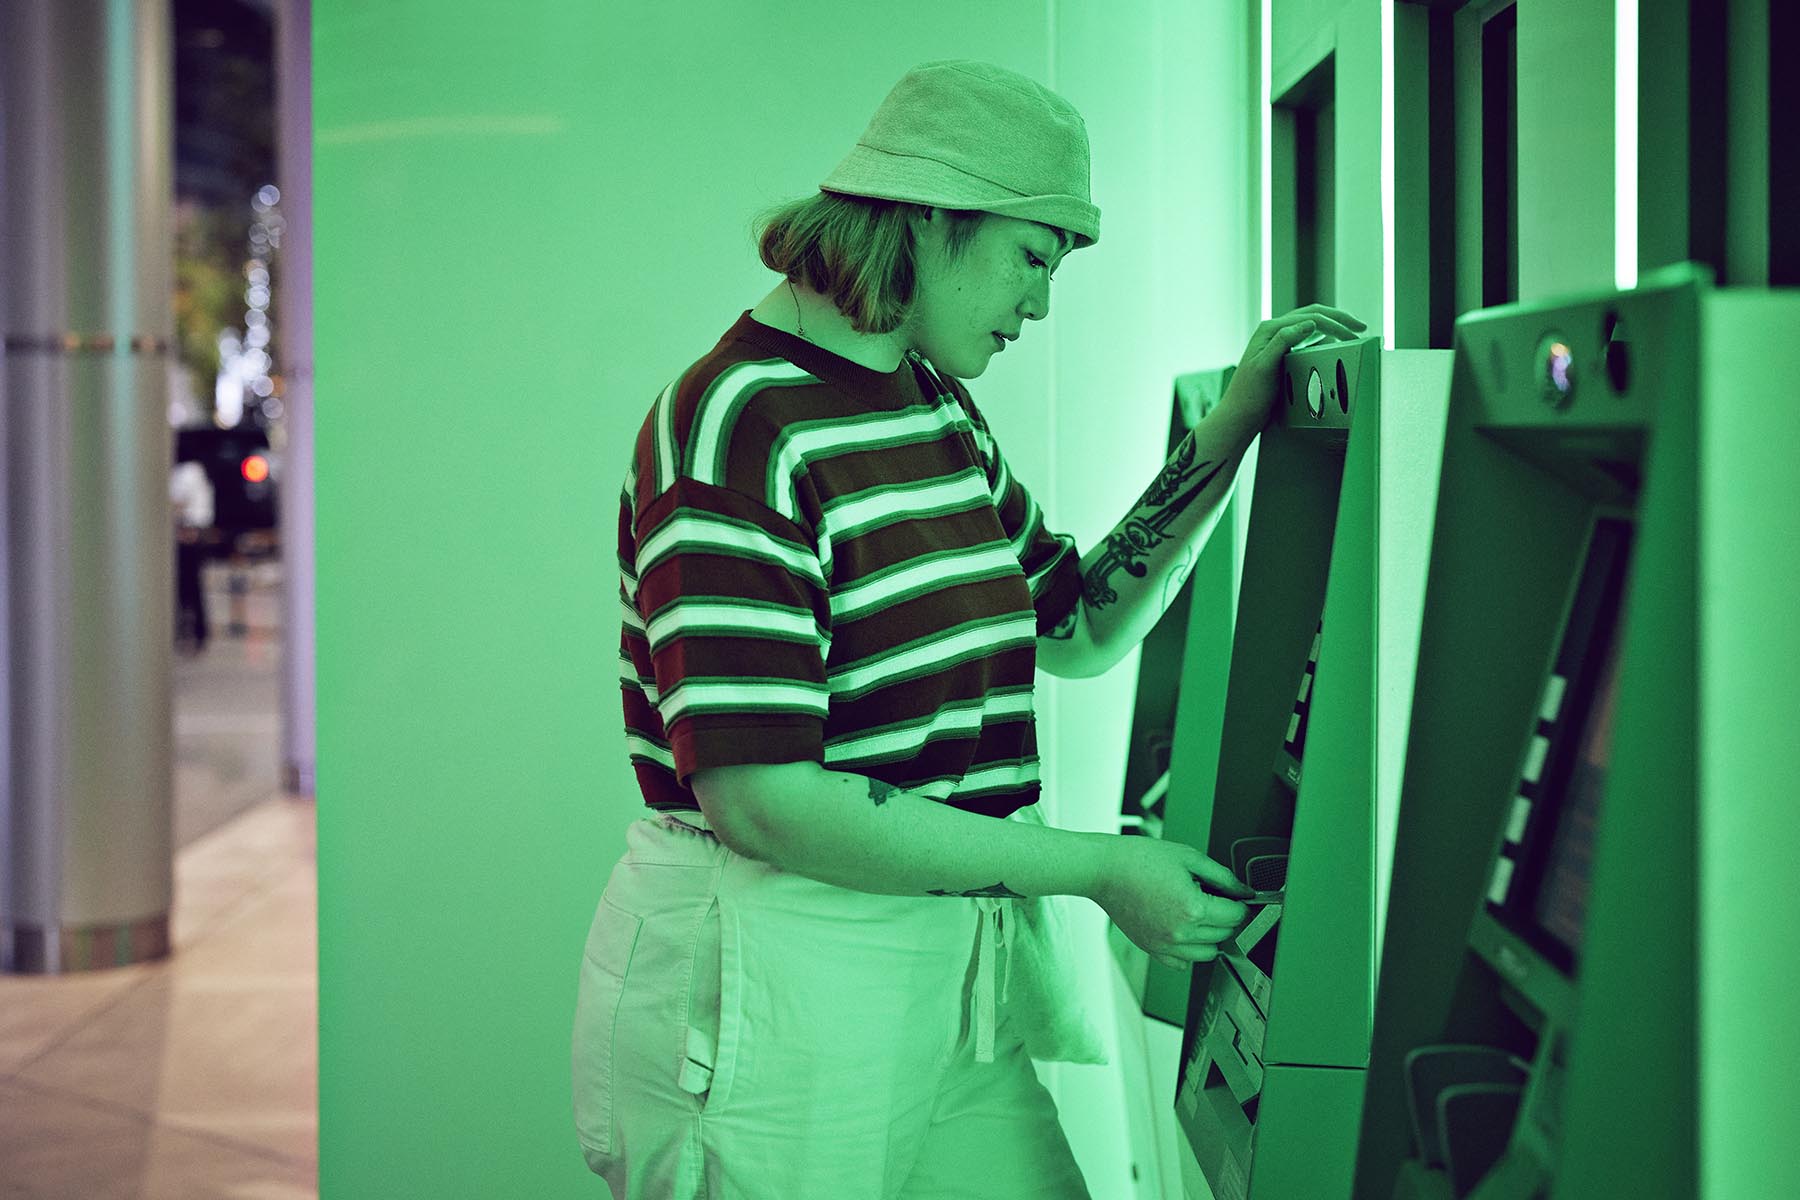 Woman wearing striped T-shirt using ATM. The bank is giving off a green glow.